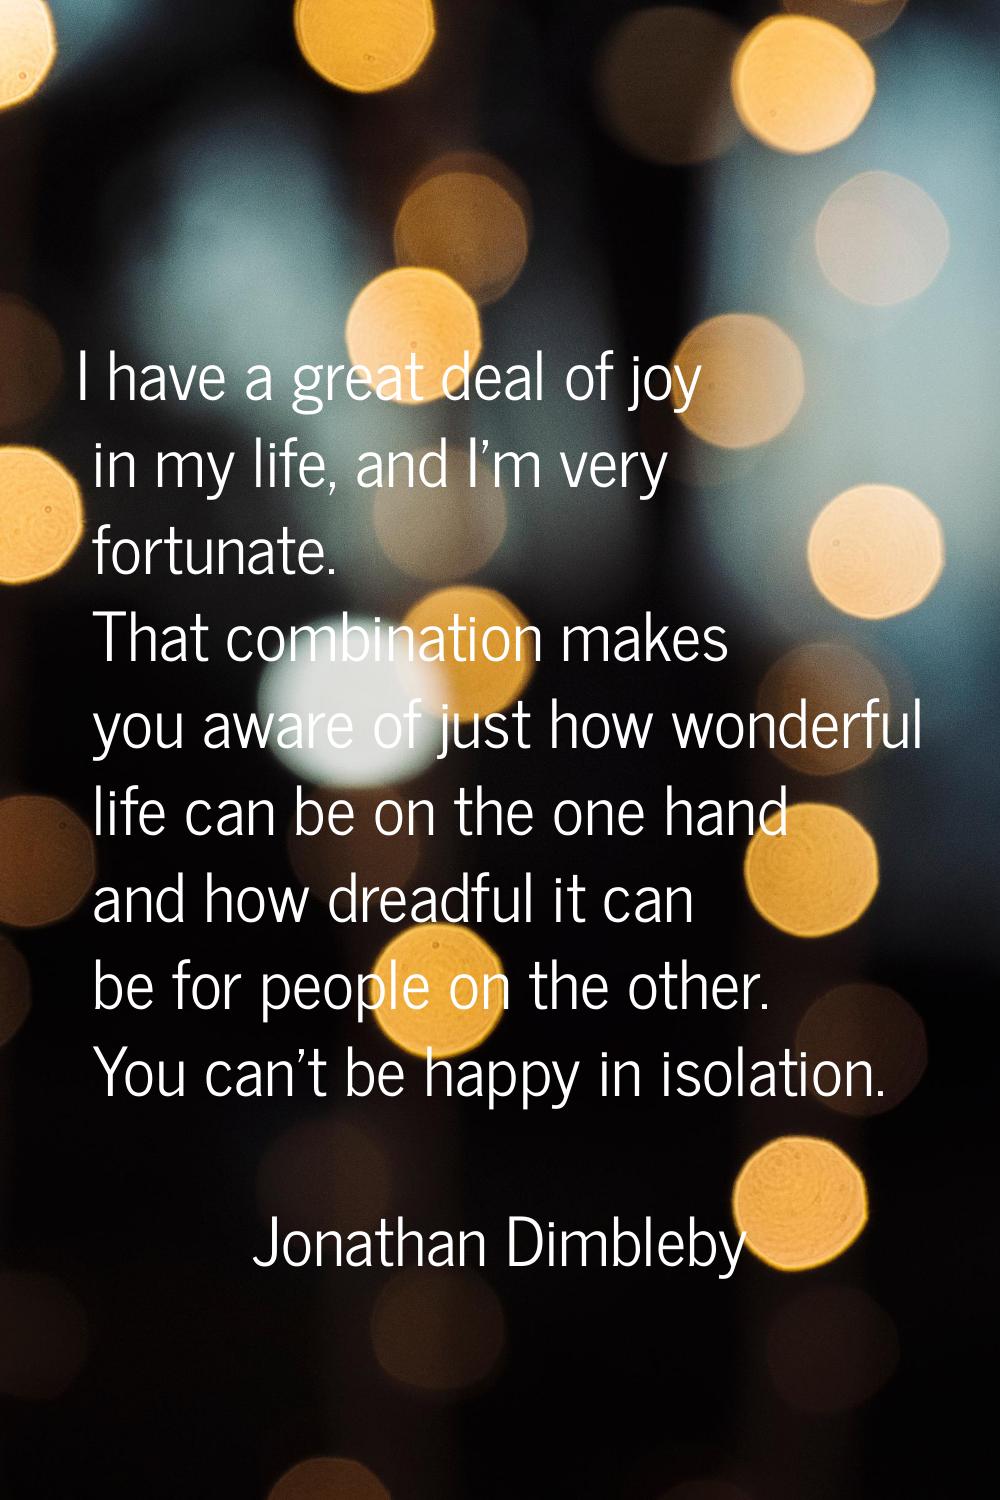 I have a great deal of joy in my life, and I'm very fortunate. That combination makes you aware of 